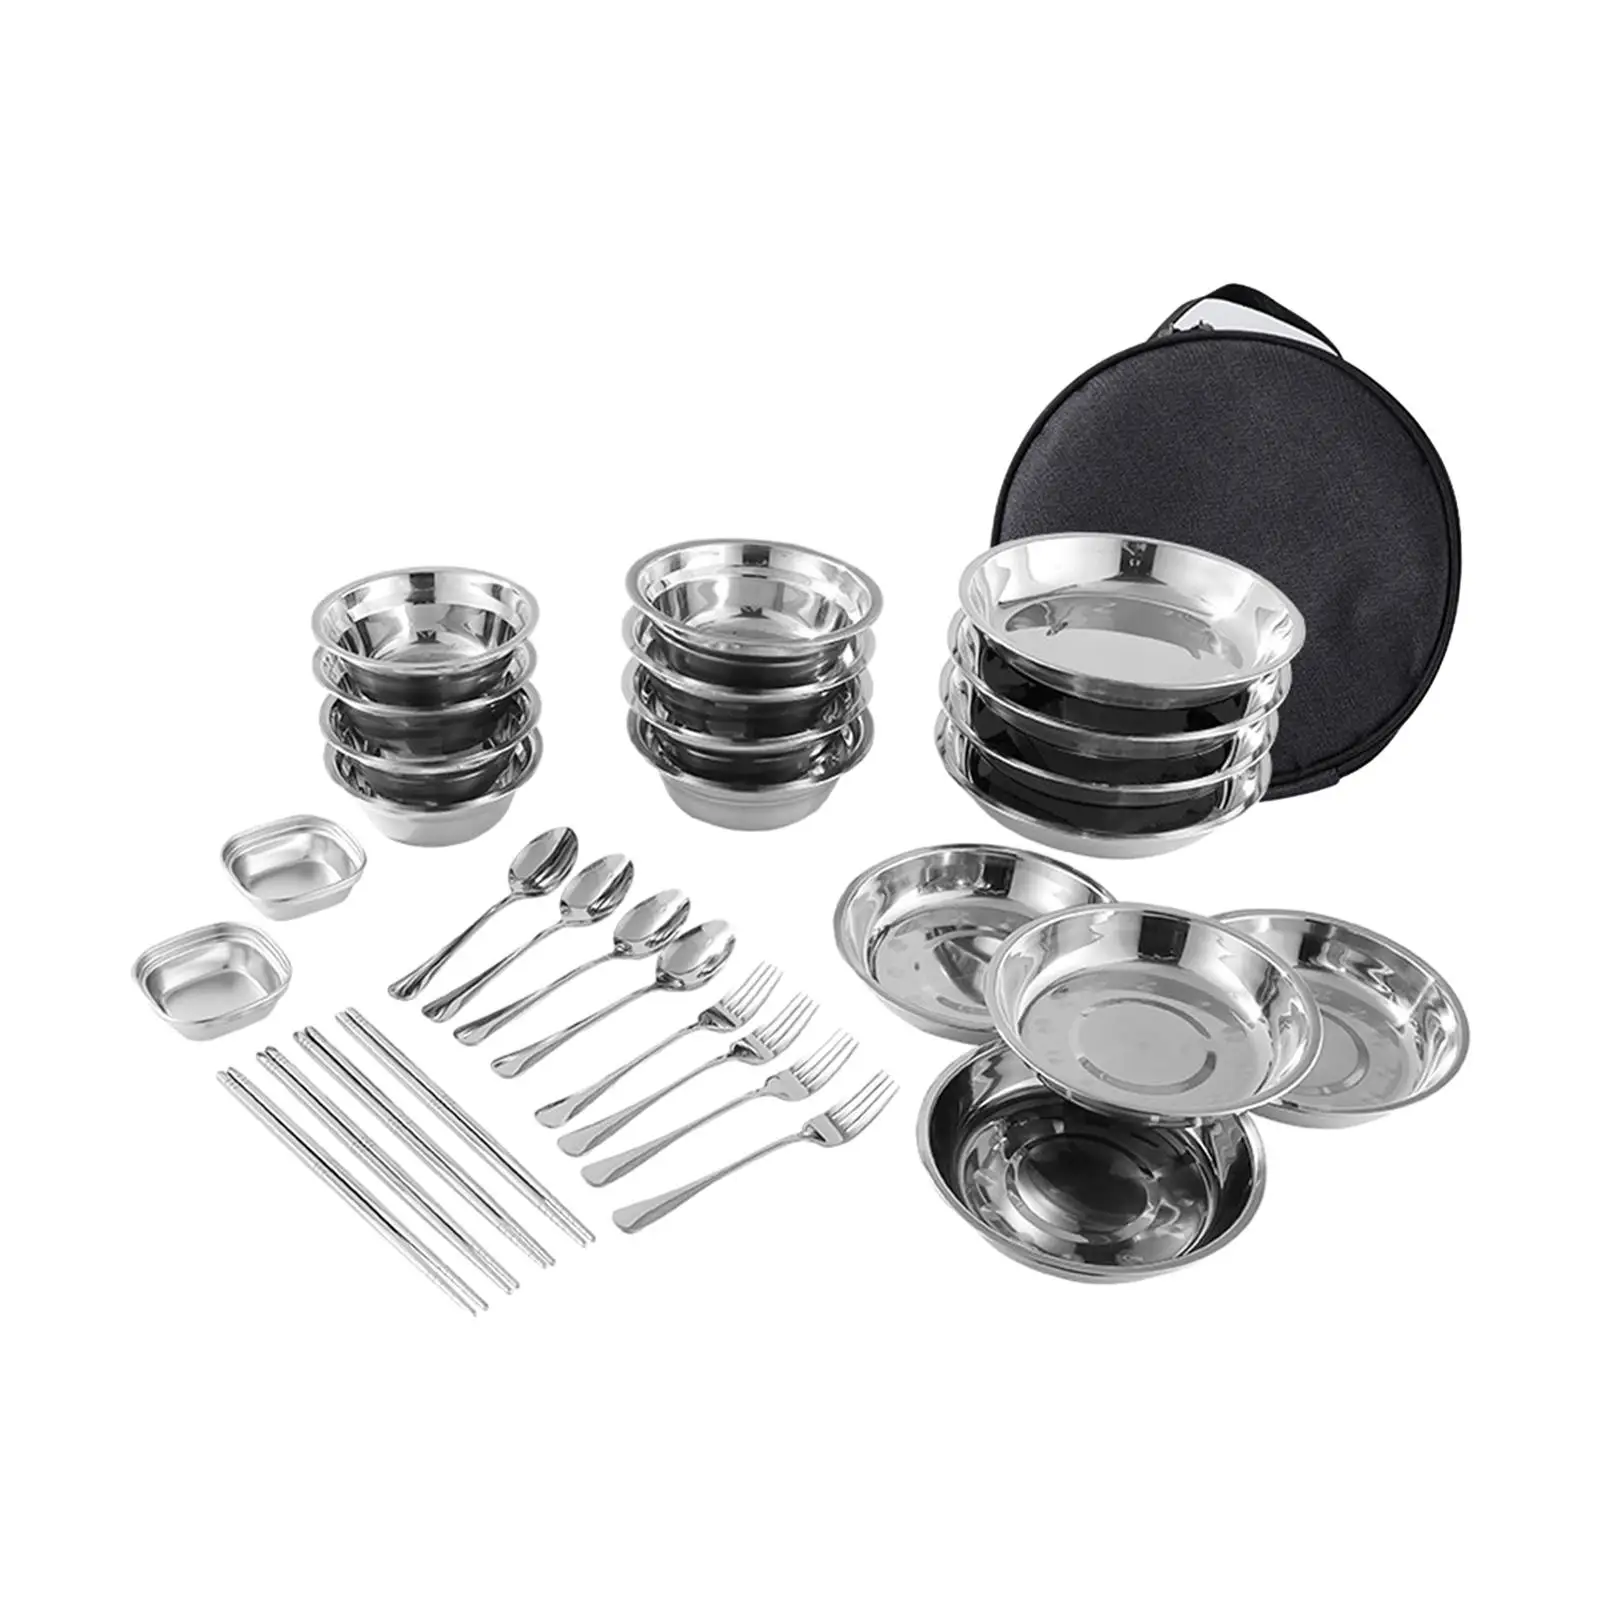 Stainless Steel Plates and Bowls Dinner Plate for Party Outdoor Use Beach